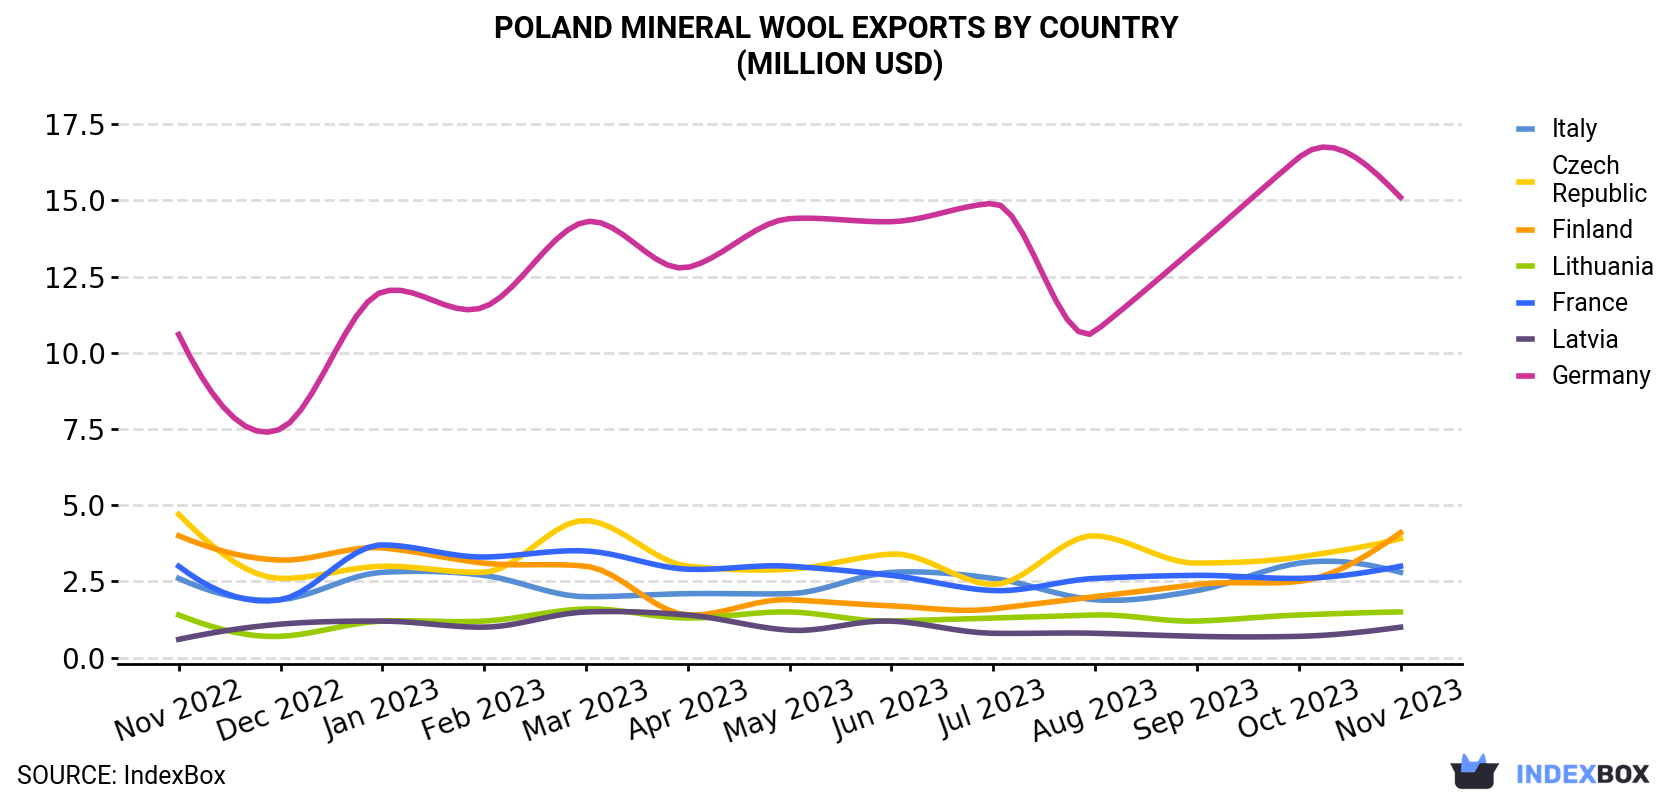 Poland Mineral Wool Exports By Country (Million USD)